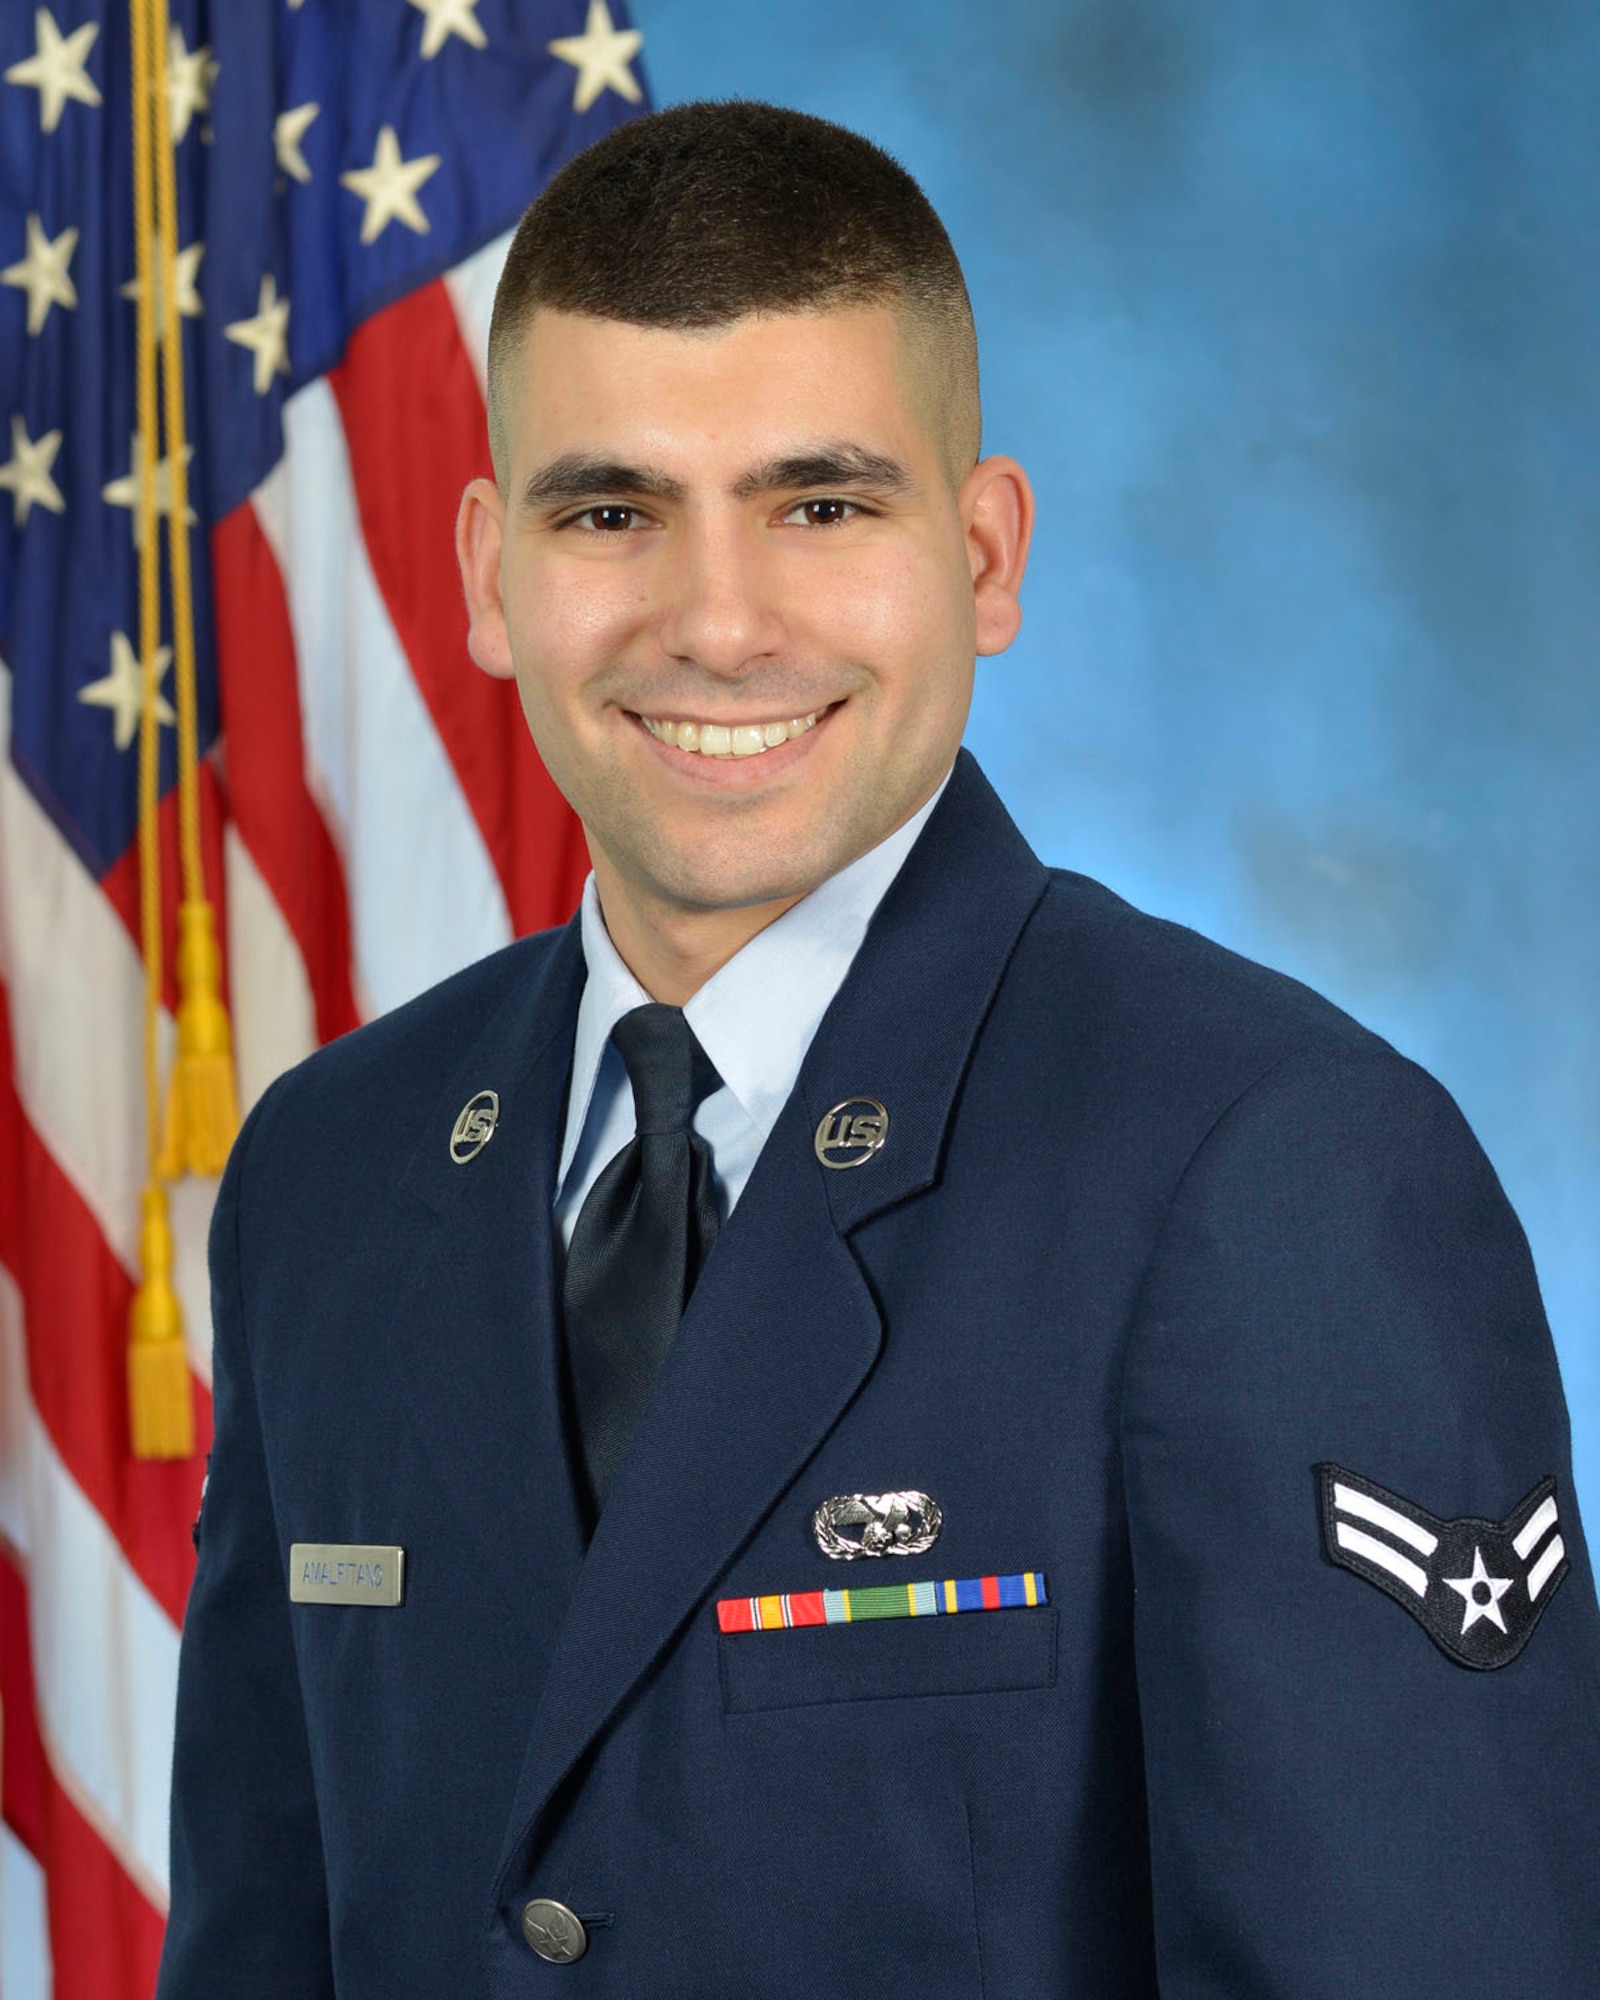 Airman 1st Class Vito Amalfitano, storage management technician for the Joint Personal Property Shipping Office-Northeast at Hanscom Air Force Base, Mass., overcame significant challenges in his background to enter the Air Force. (U.S. Air Force photo by Linda LaBonte Britt)